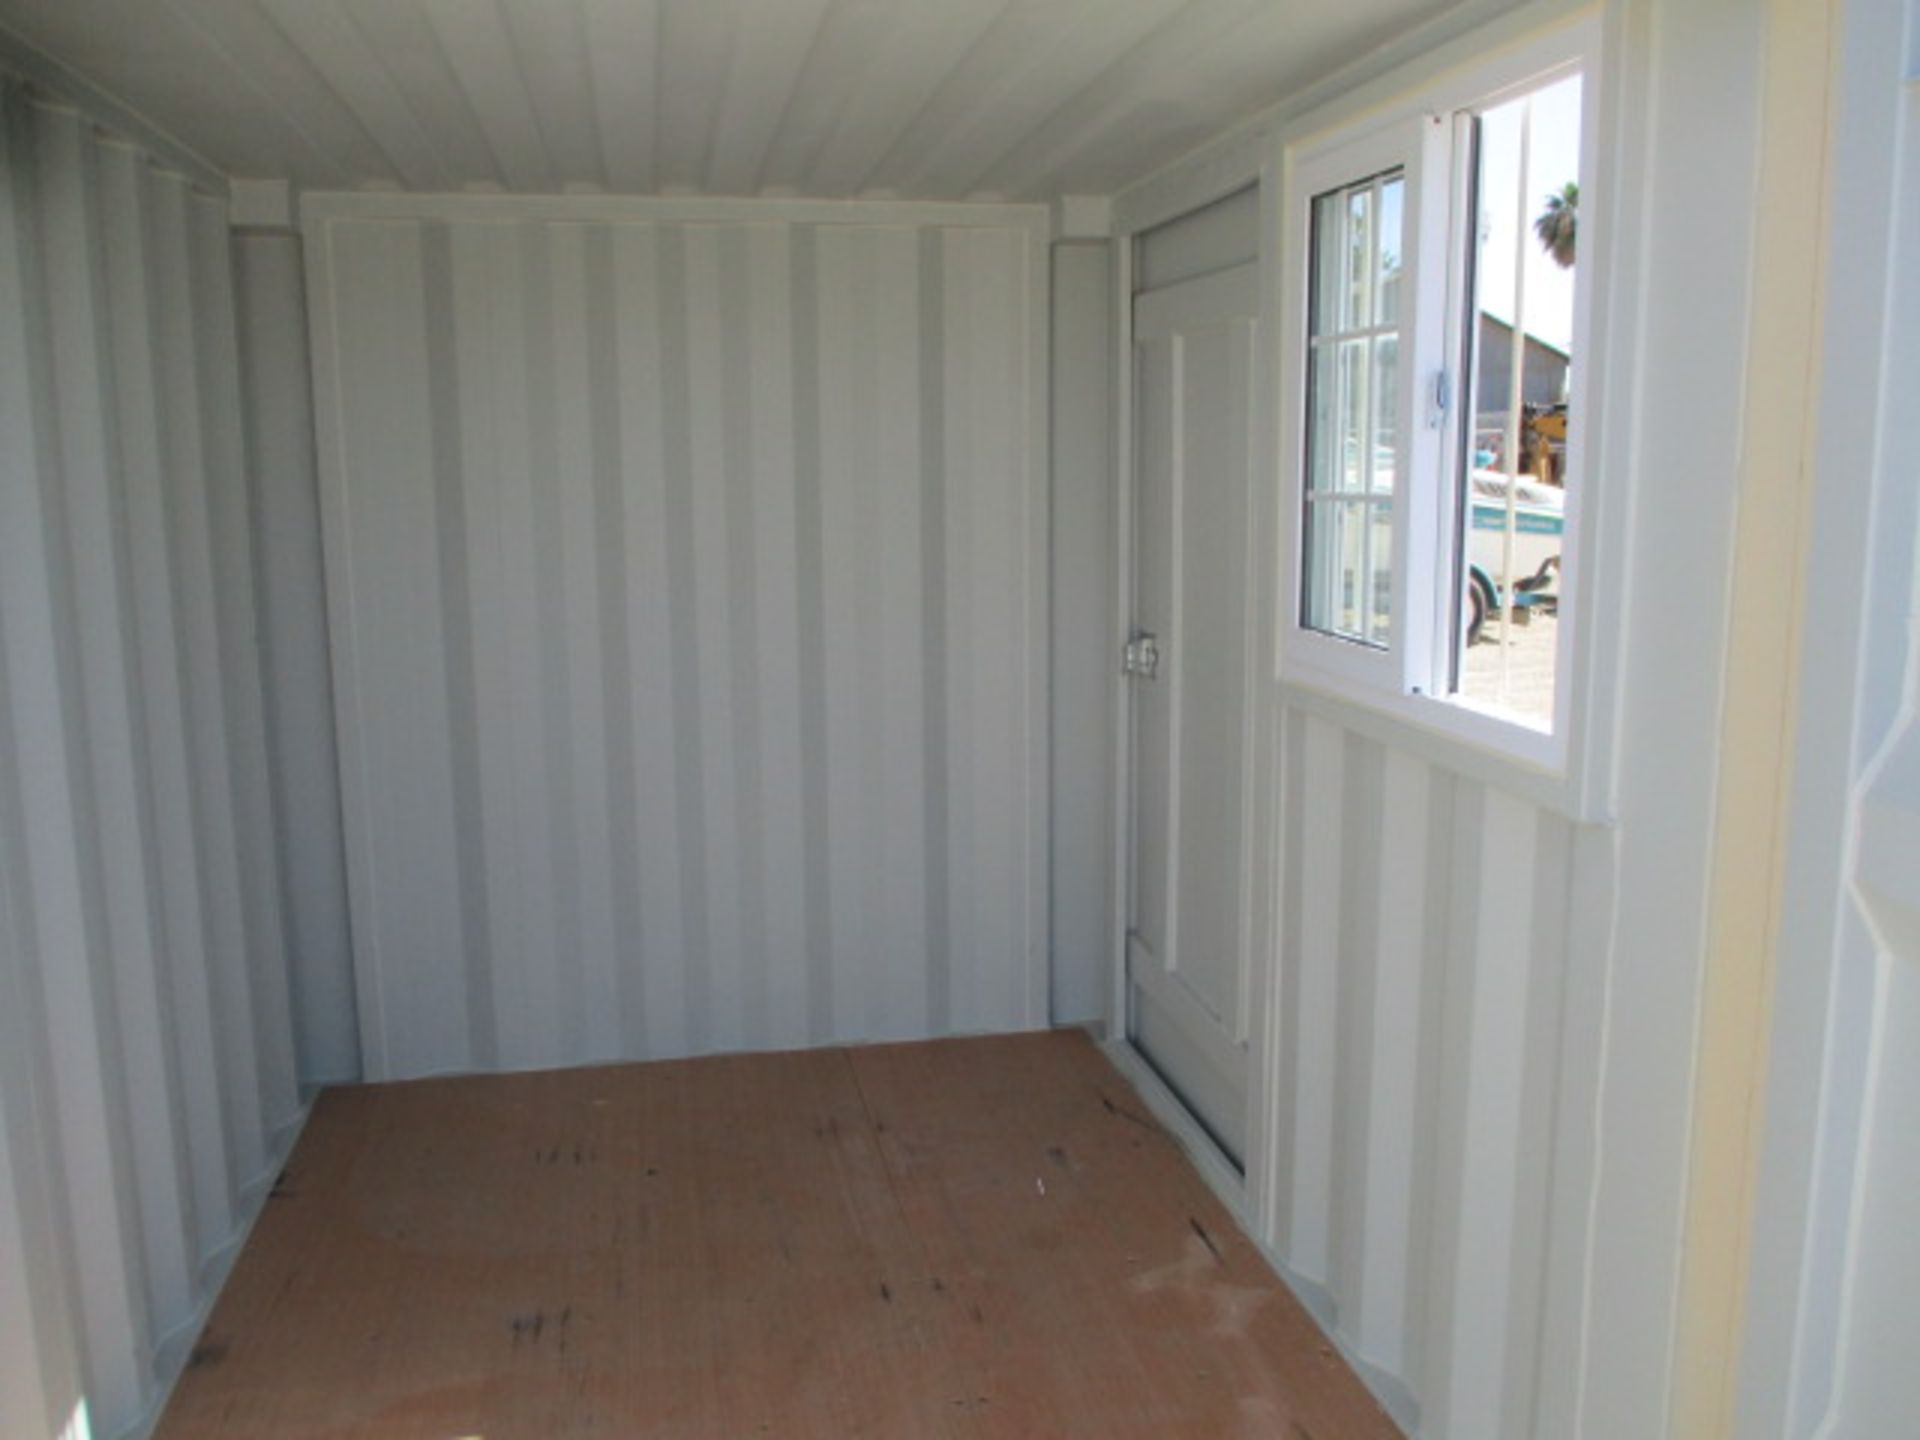 Unused 8' Portable Office Container, S/N: LYP8-436 - Image 17 of 24